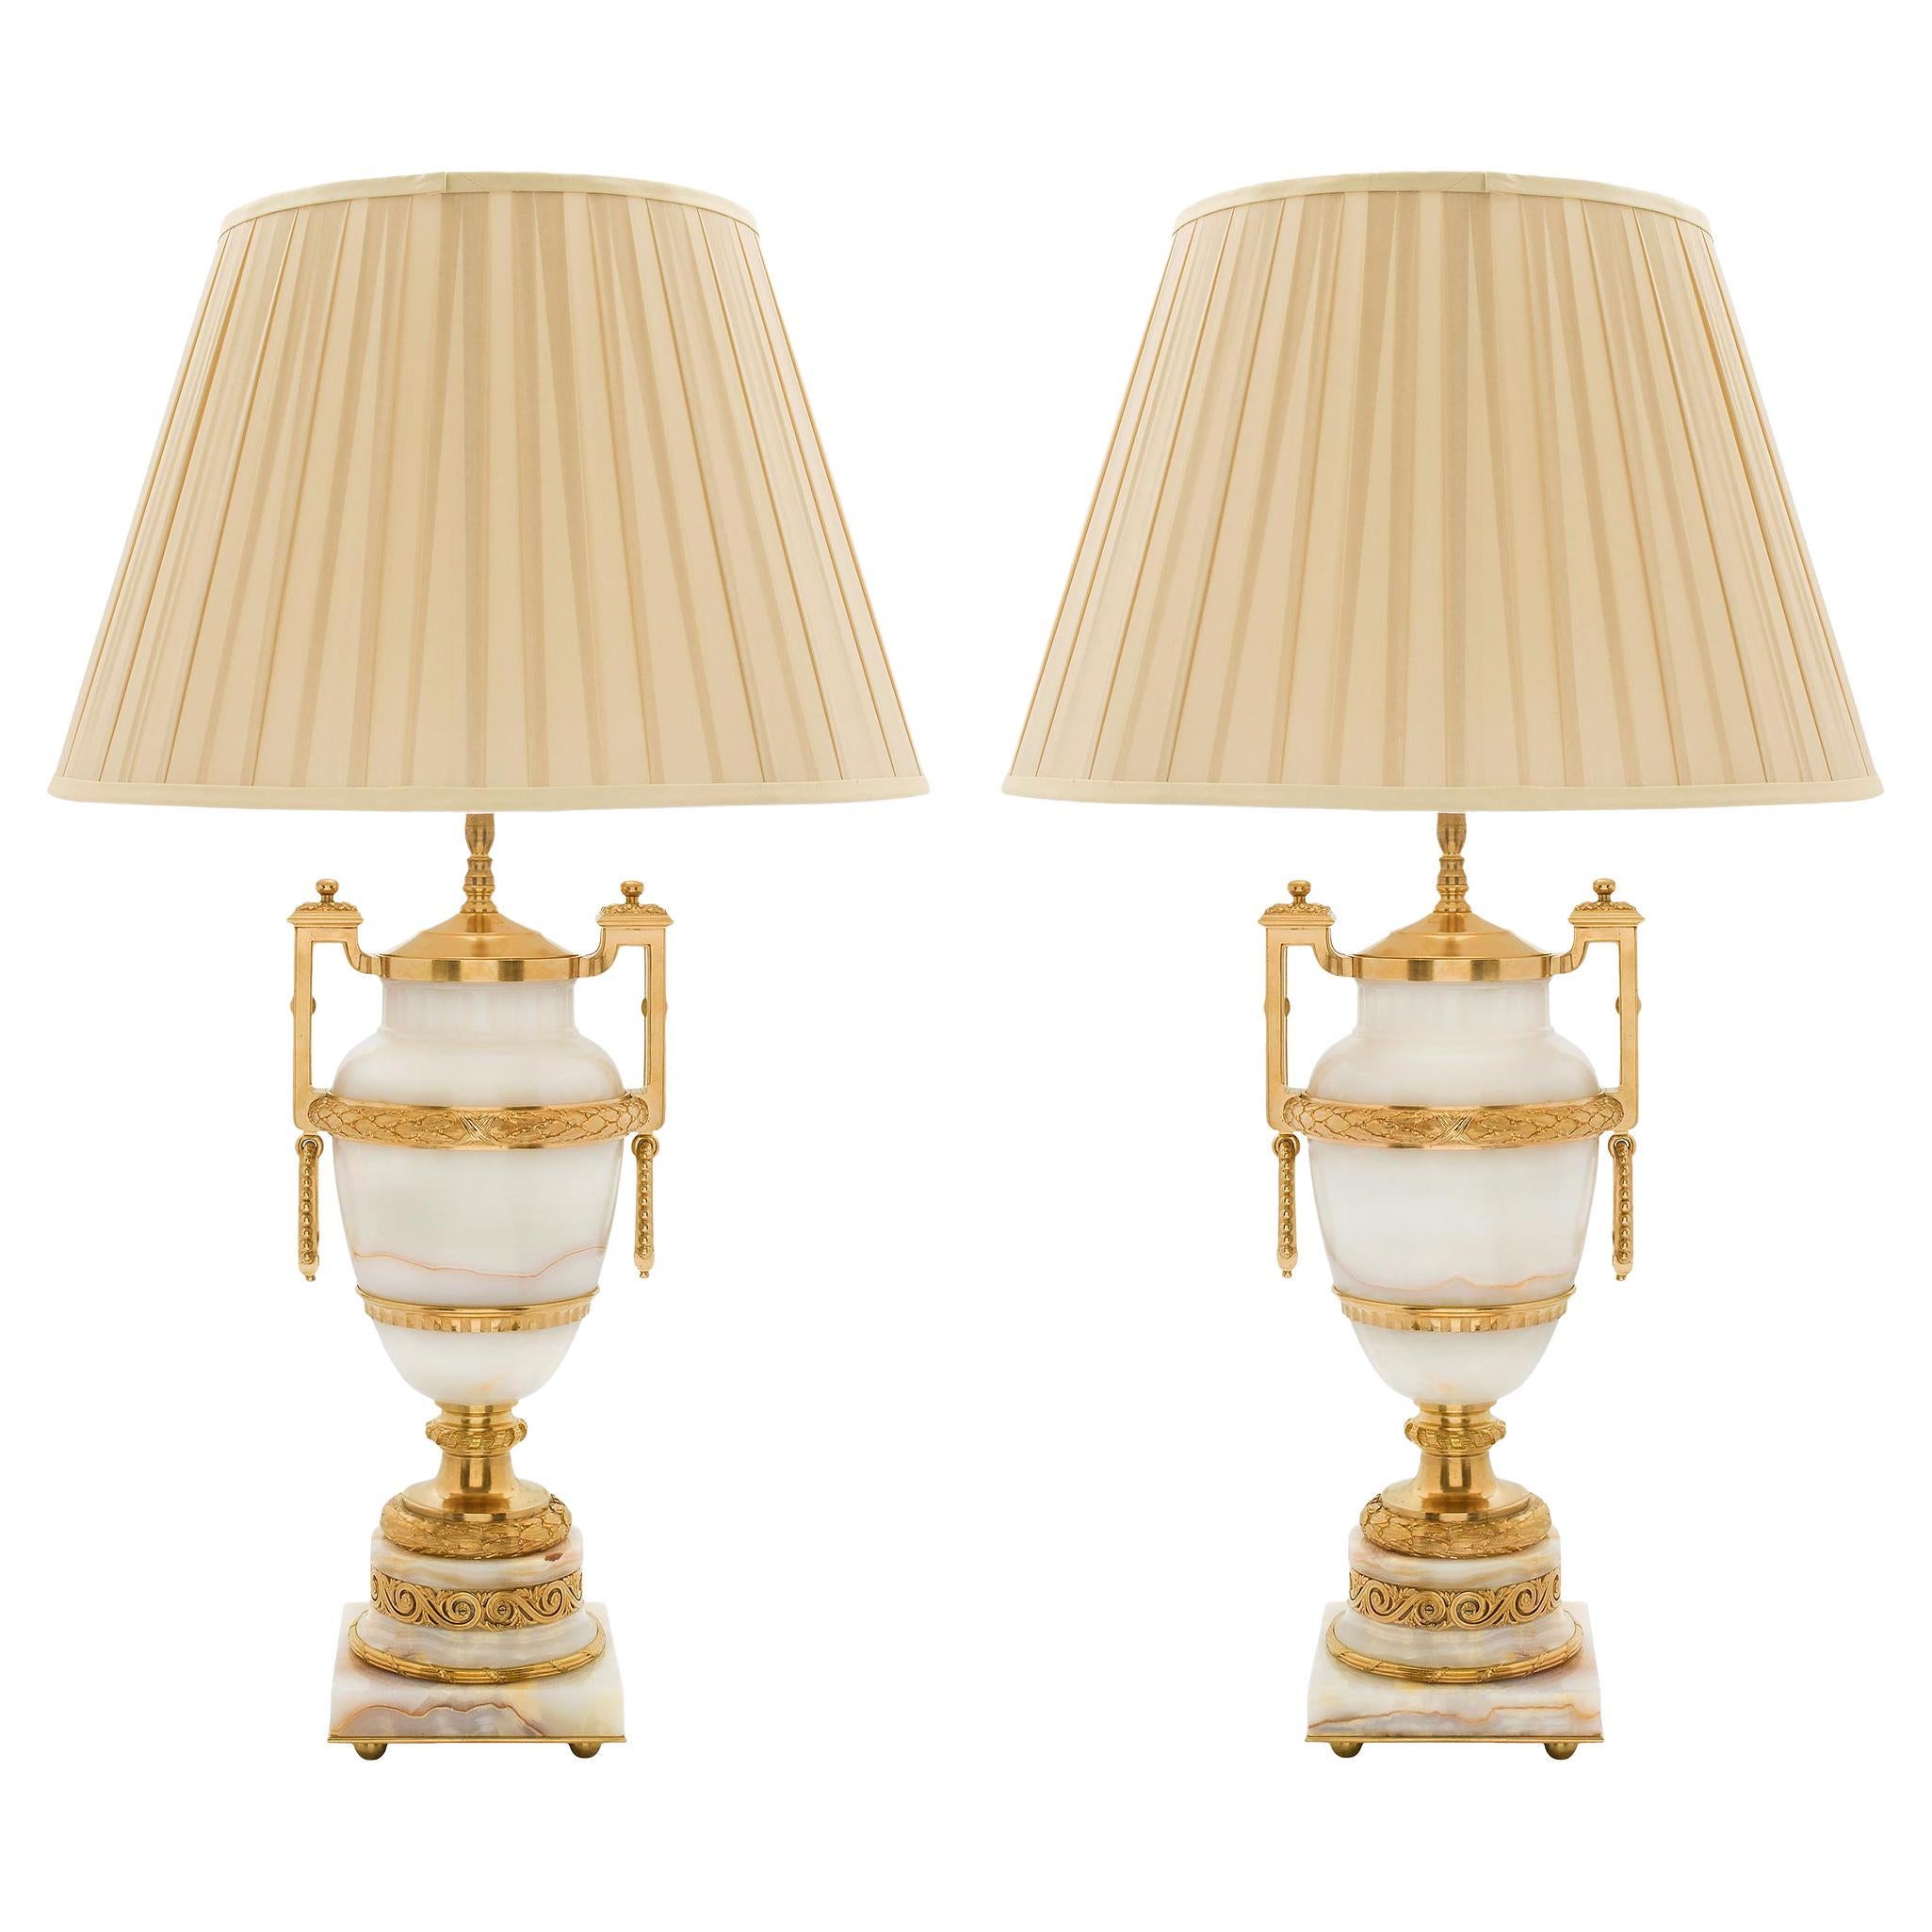 Pair of French Onyx and Ormolu Lamps For Sale at 1stDibs